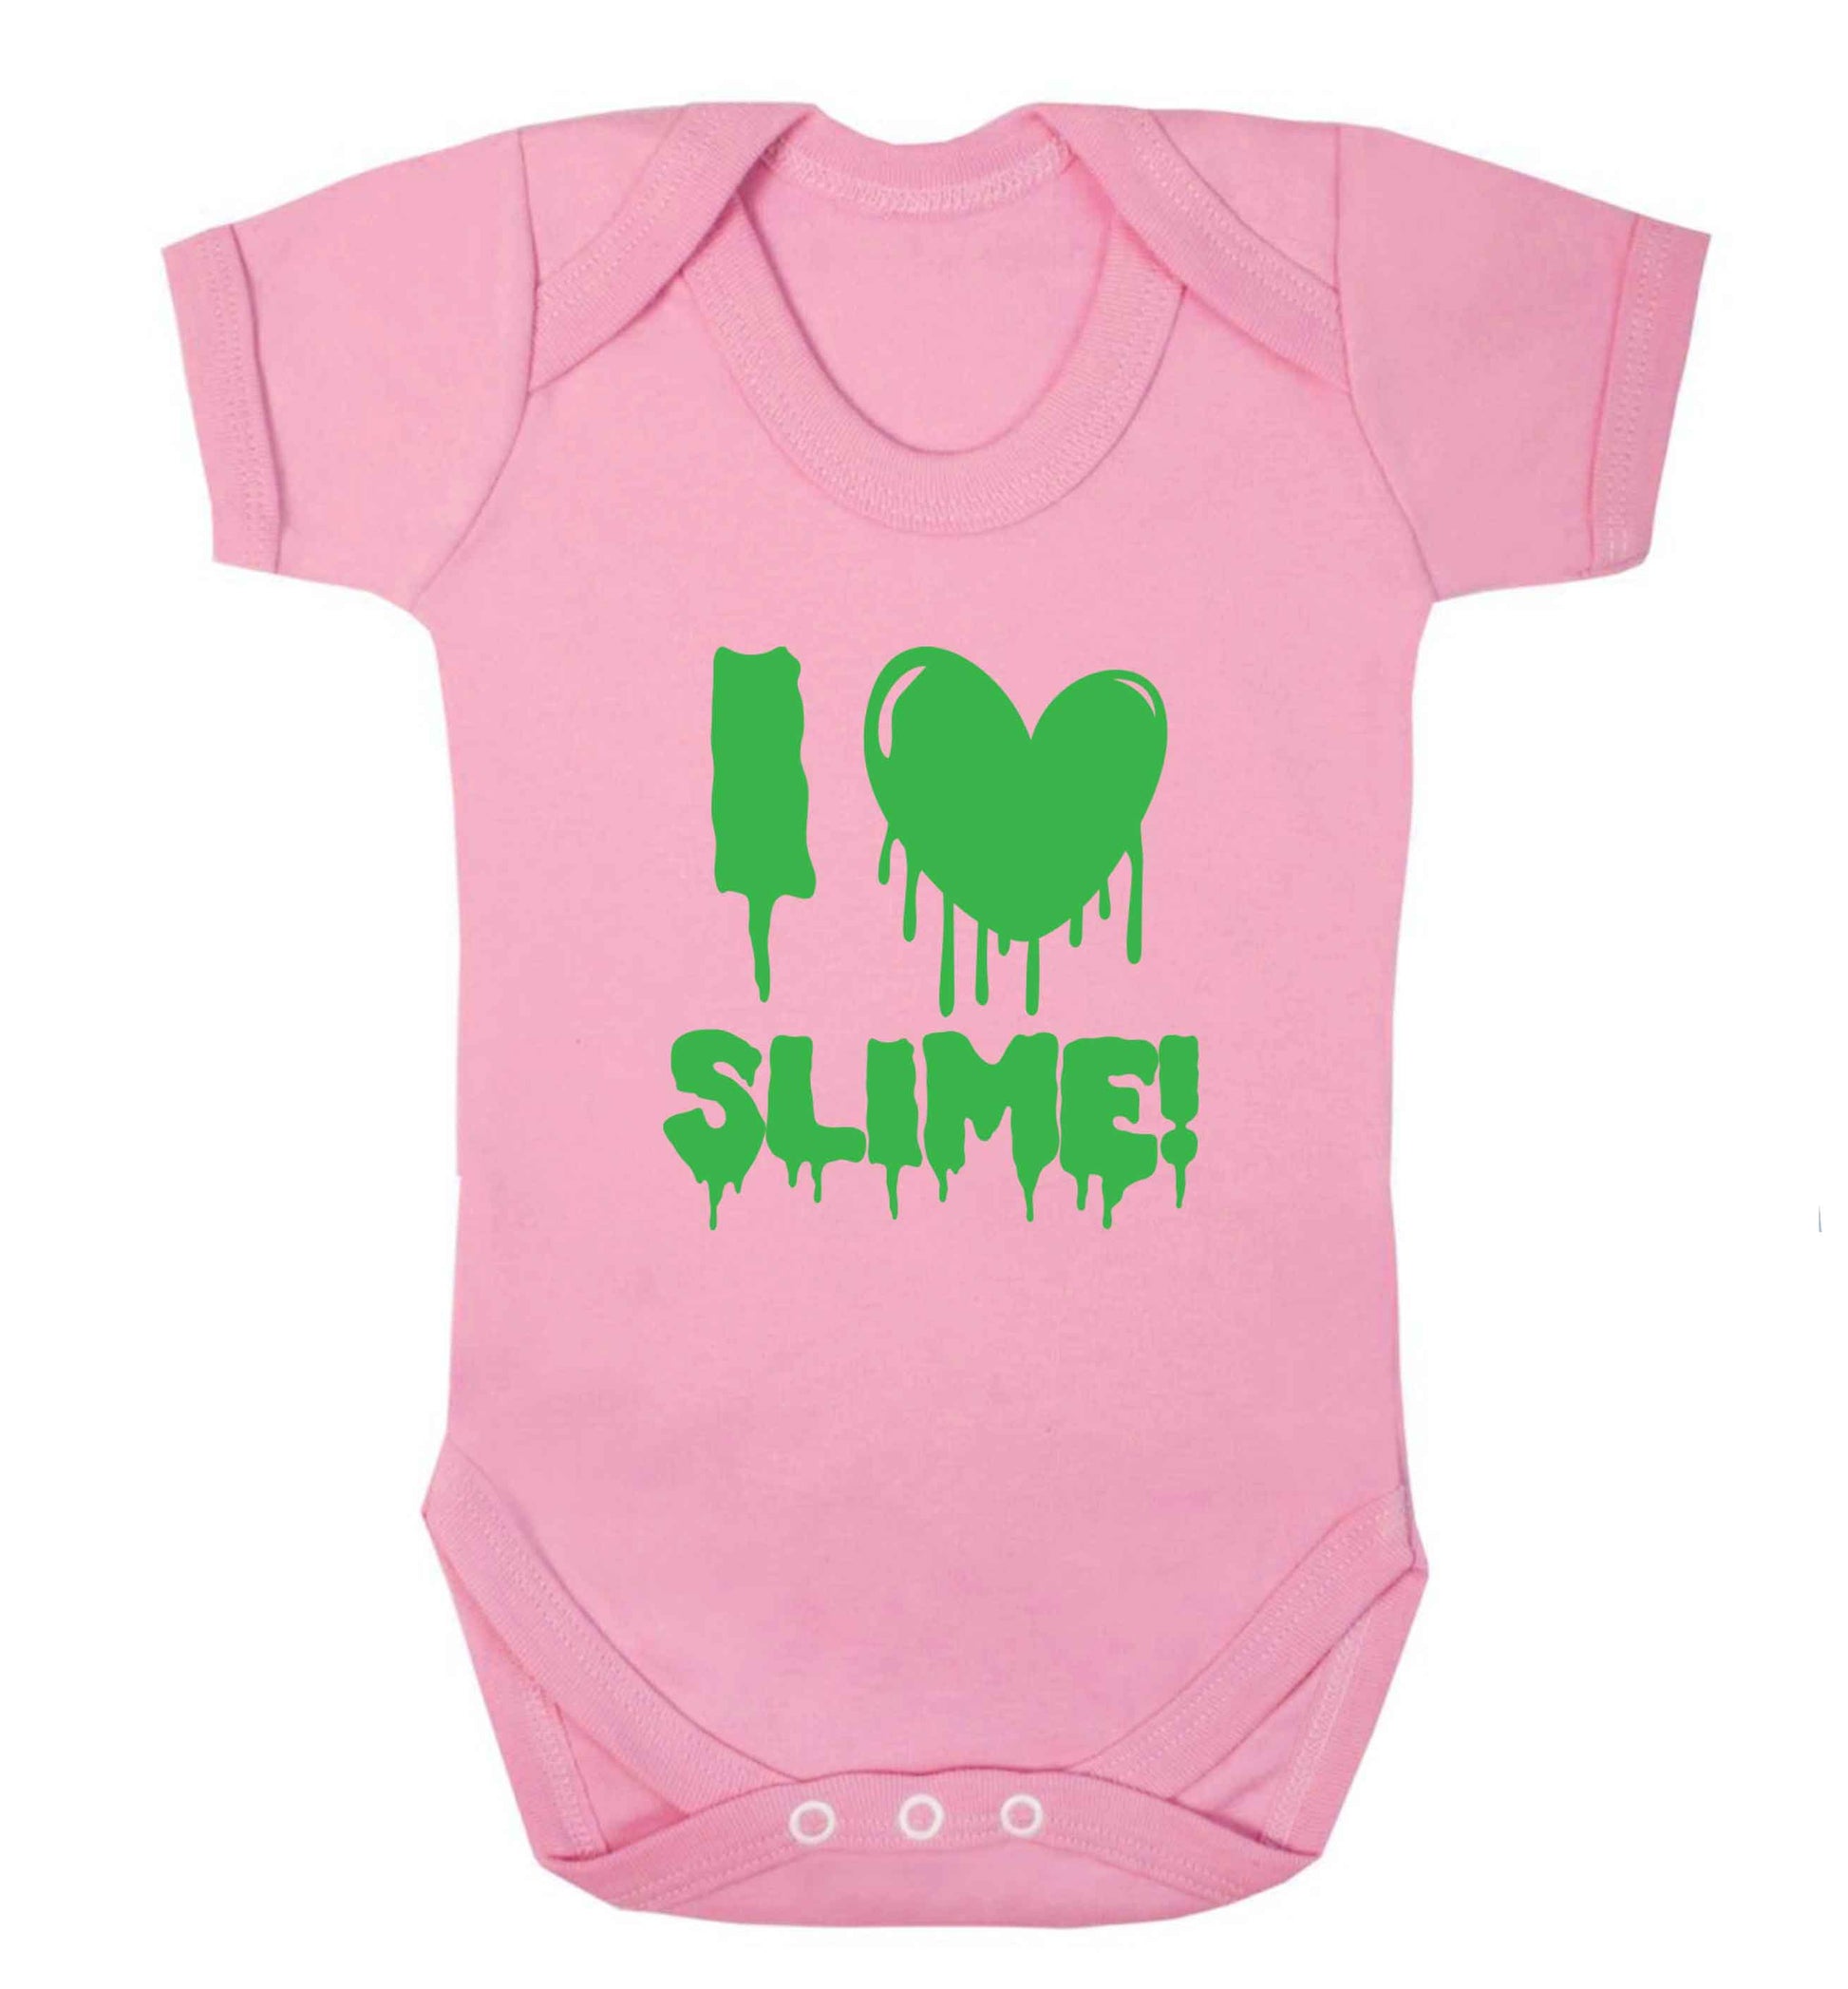 Neon green I love slime baby vest pale pink 18-24 months